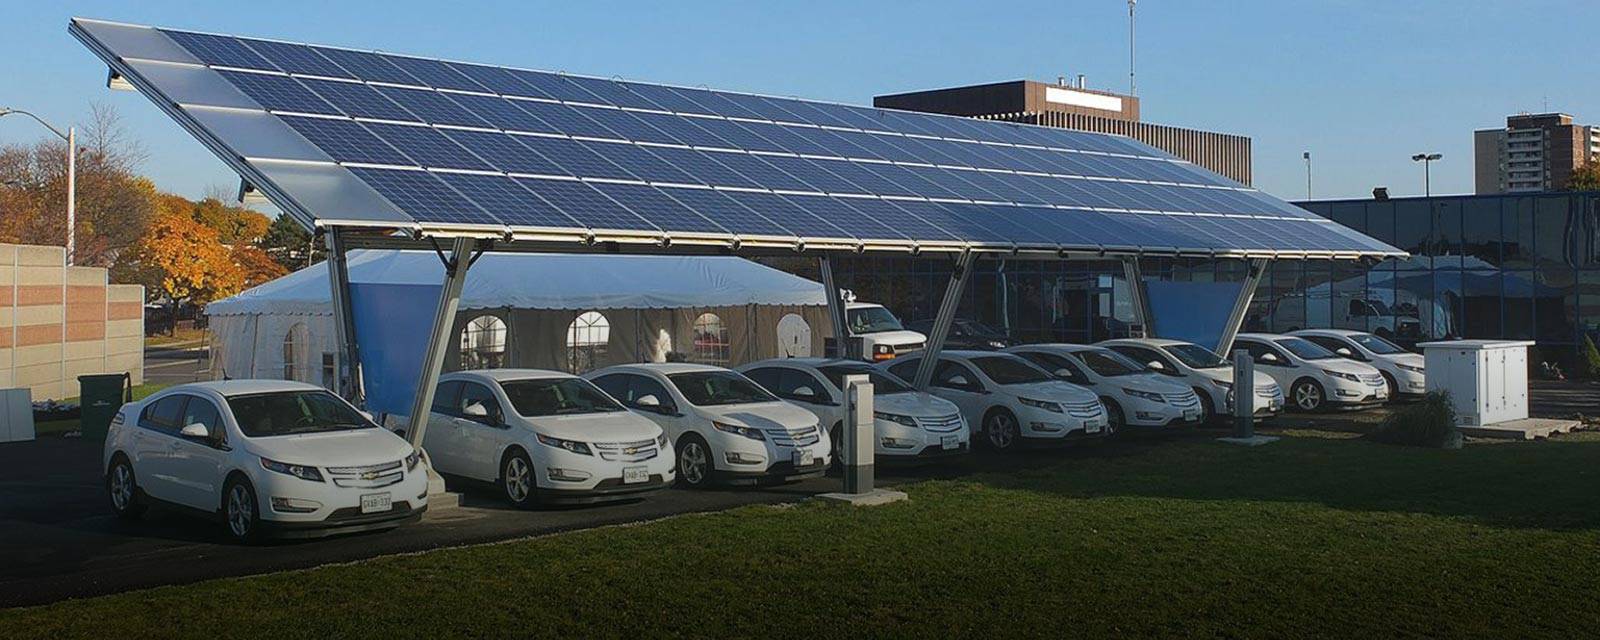 Solar panel installed in parking lot